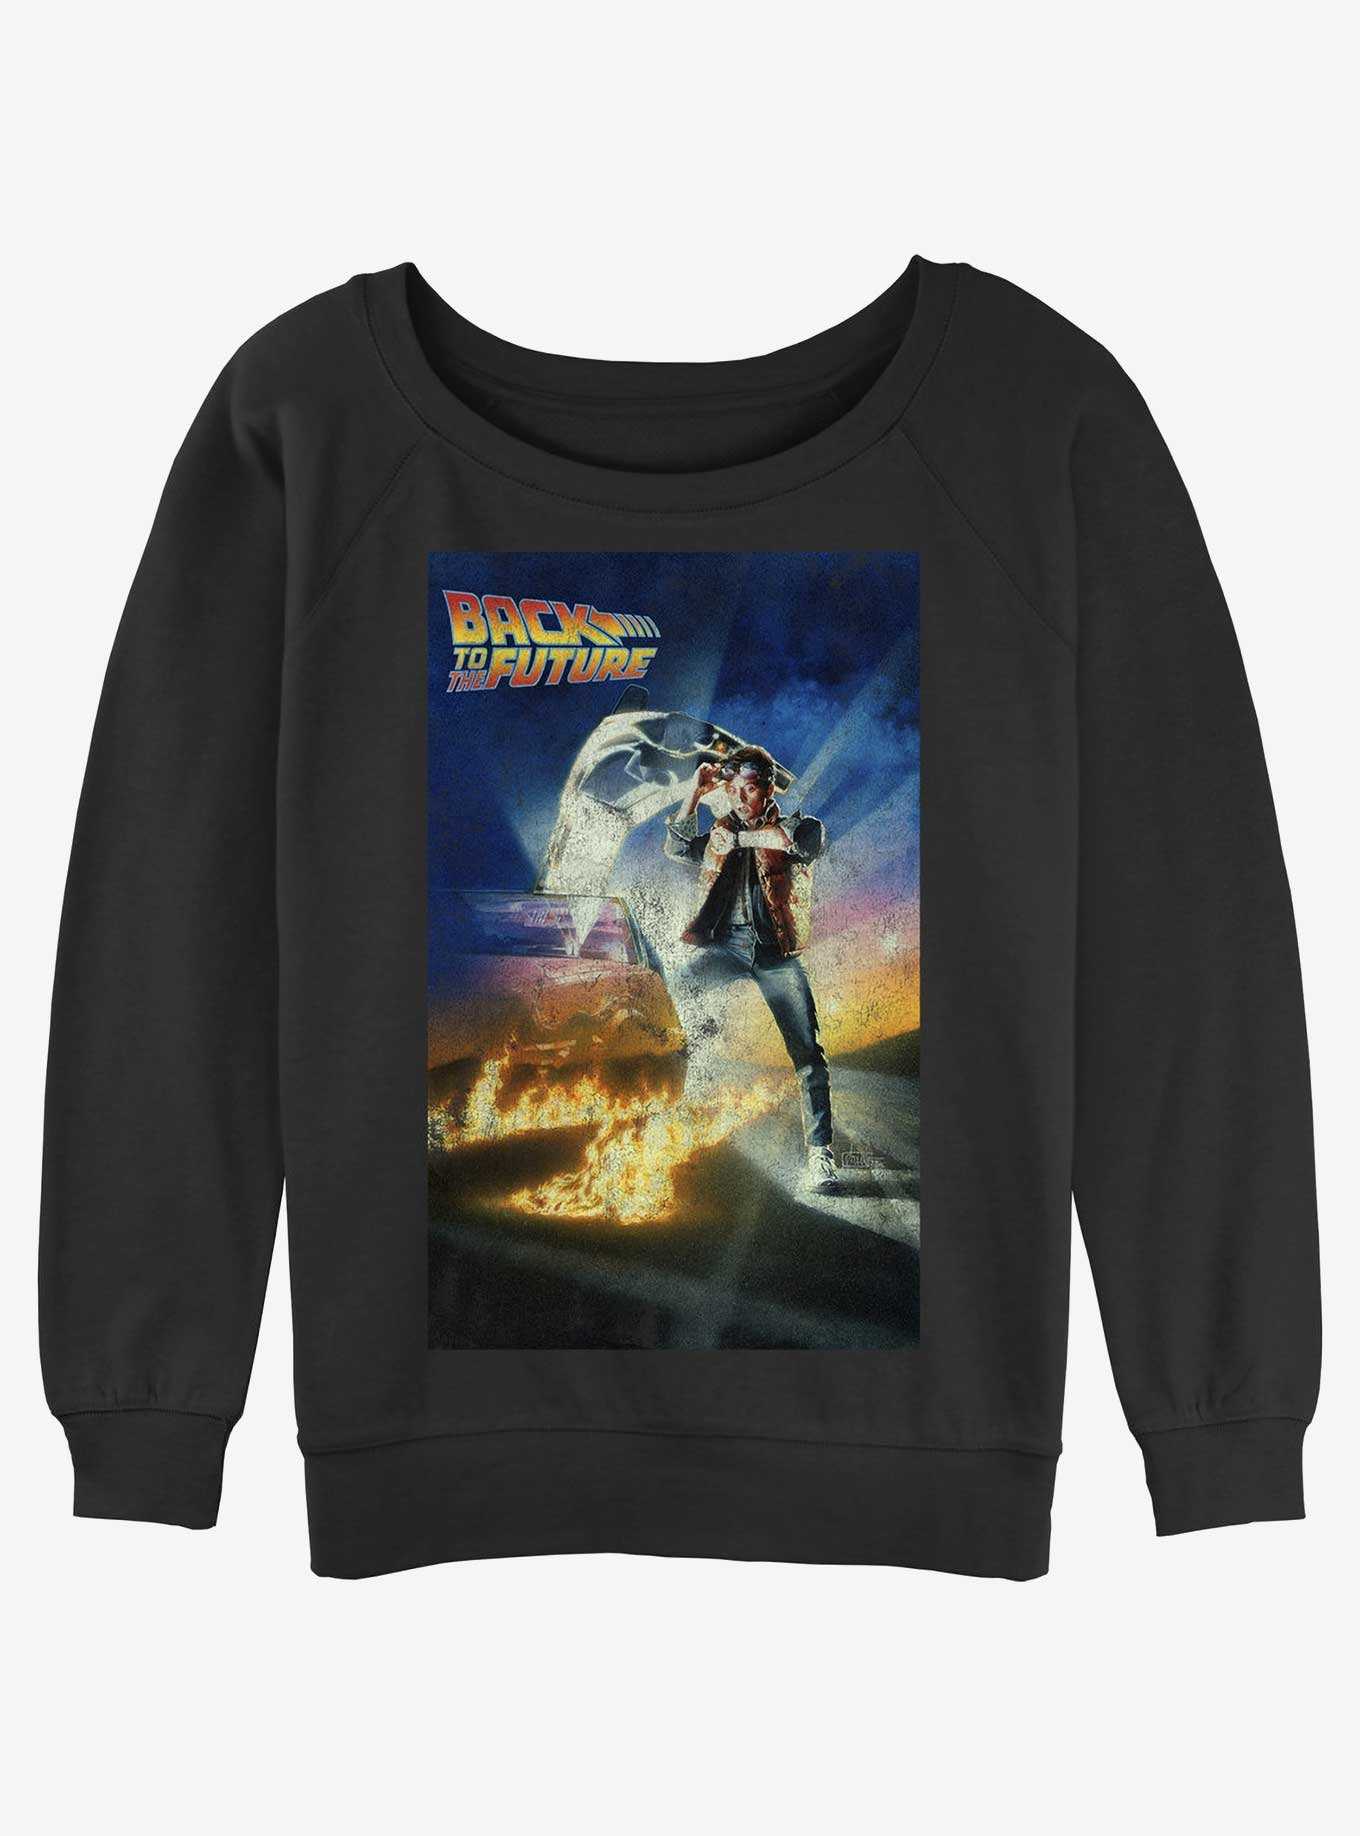 Back to the Future Classic Poster Girls Slouchy Sweatshirt, , hi-res